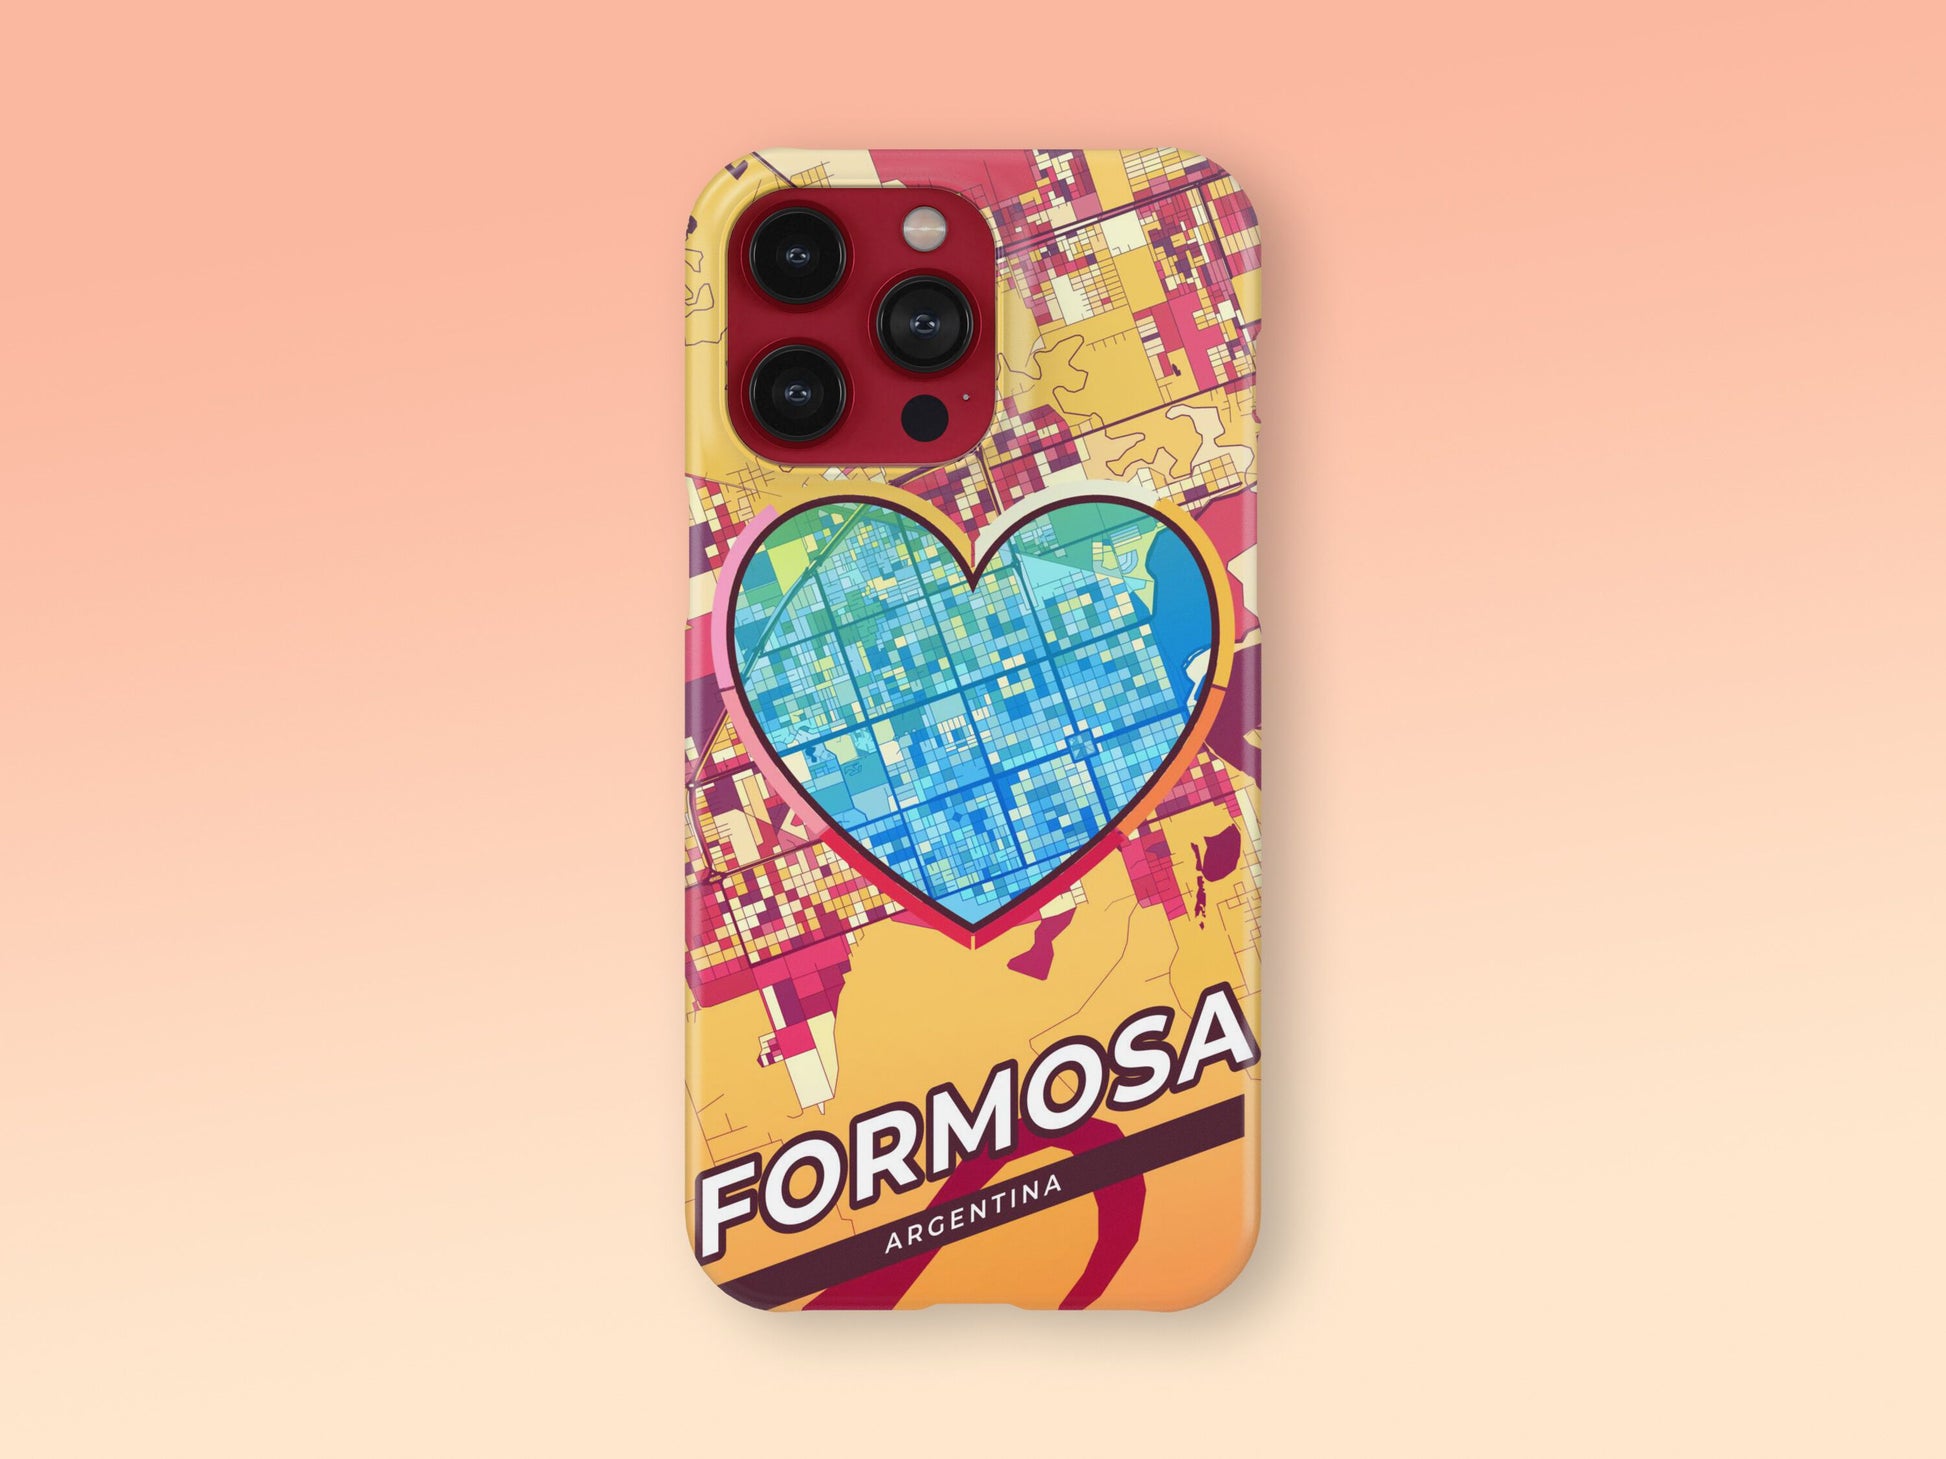 Formosa Argentina slim phone case with colorful icon. Birthday, wedding or housewarming gift. Couple match cases. 2